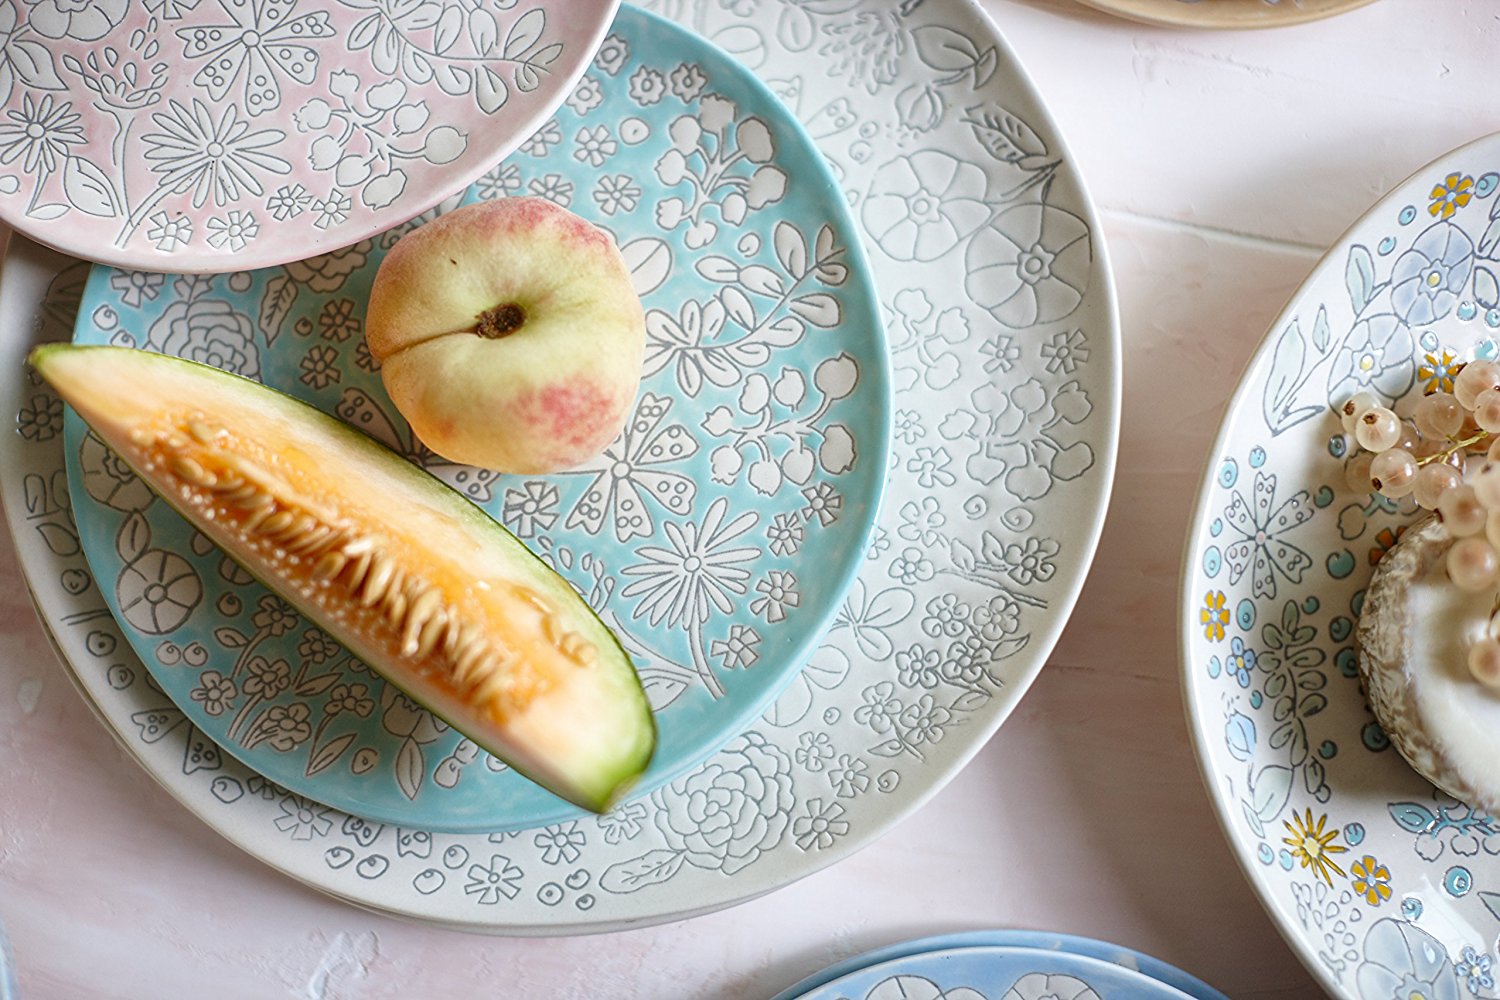 Amazon's New Line of Ceramic Dinnerware Is a Breath of Fresh Air